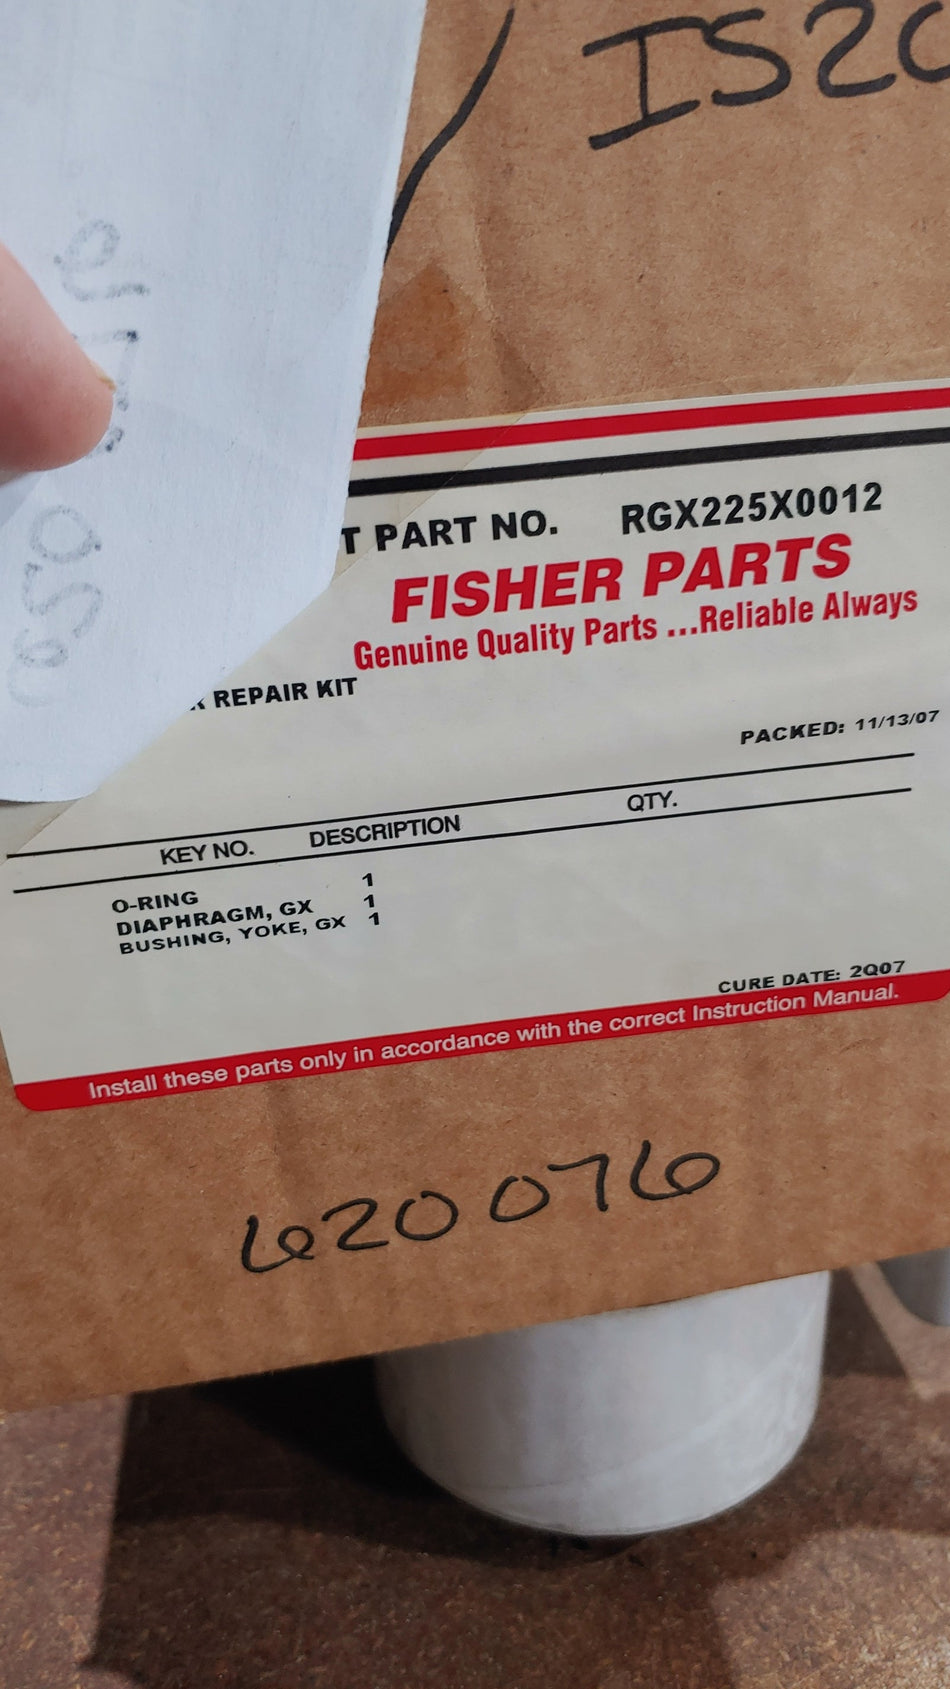 FISHER EMERSON RGX225X0012 SIZE 225 ACTUATOR REPAIR KIT CURE DATE:2Q07